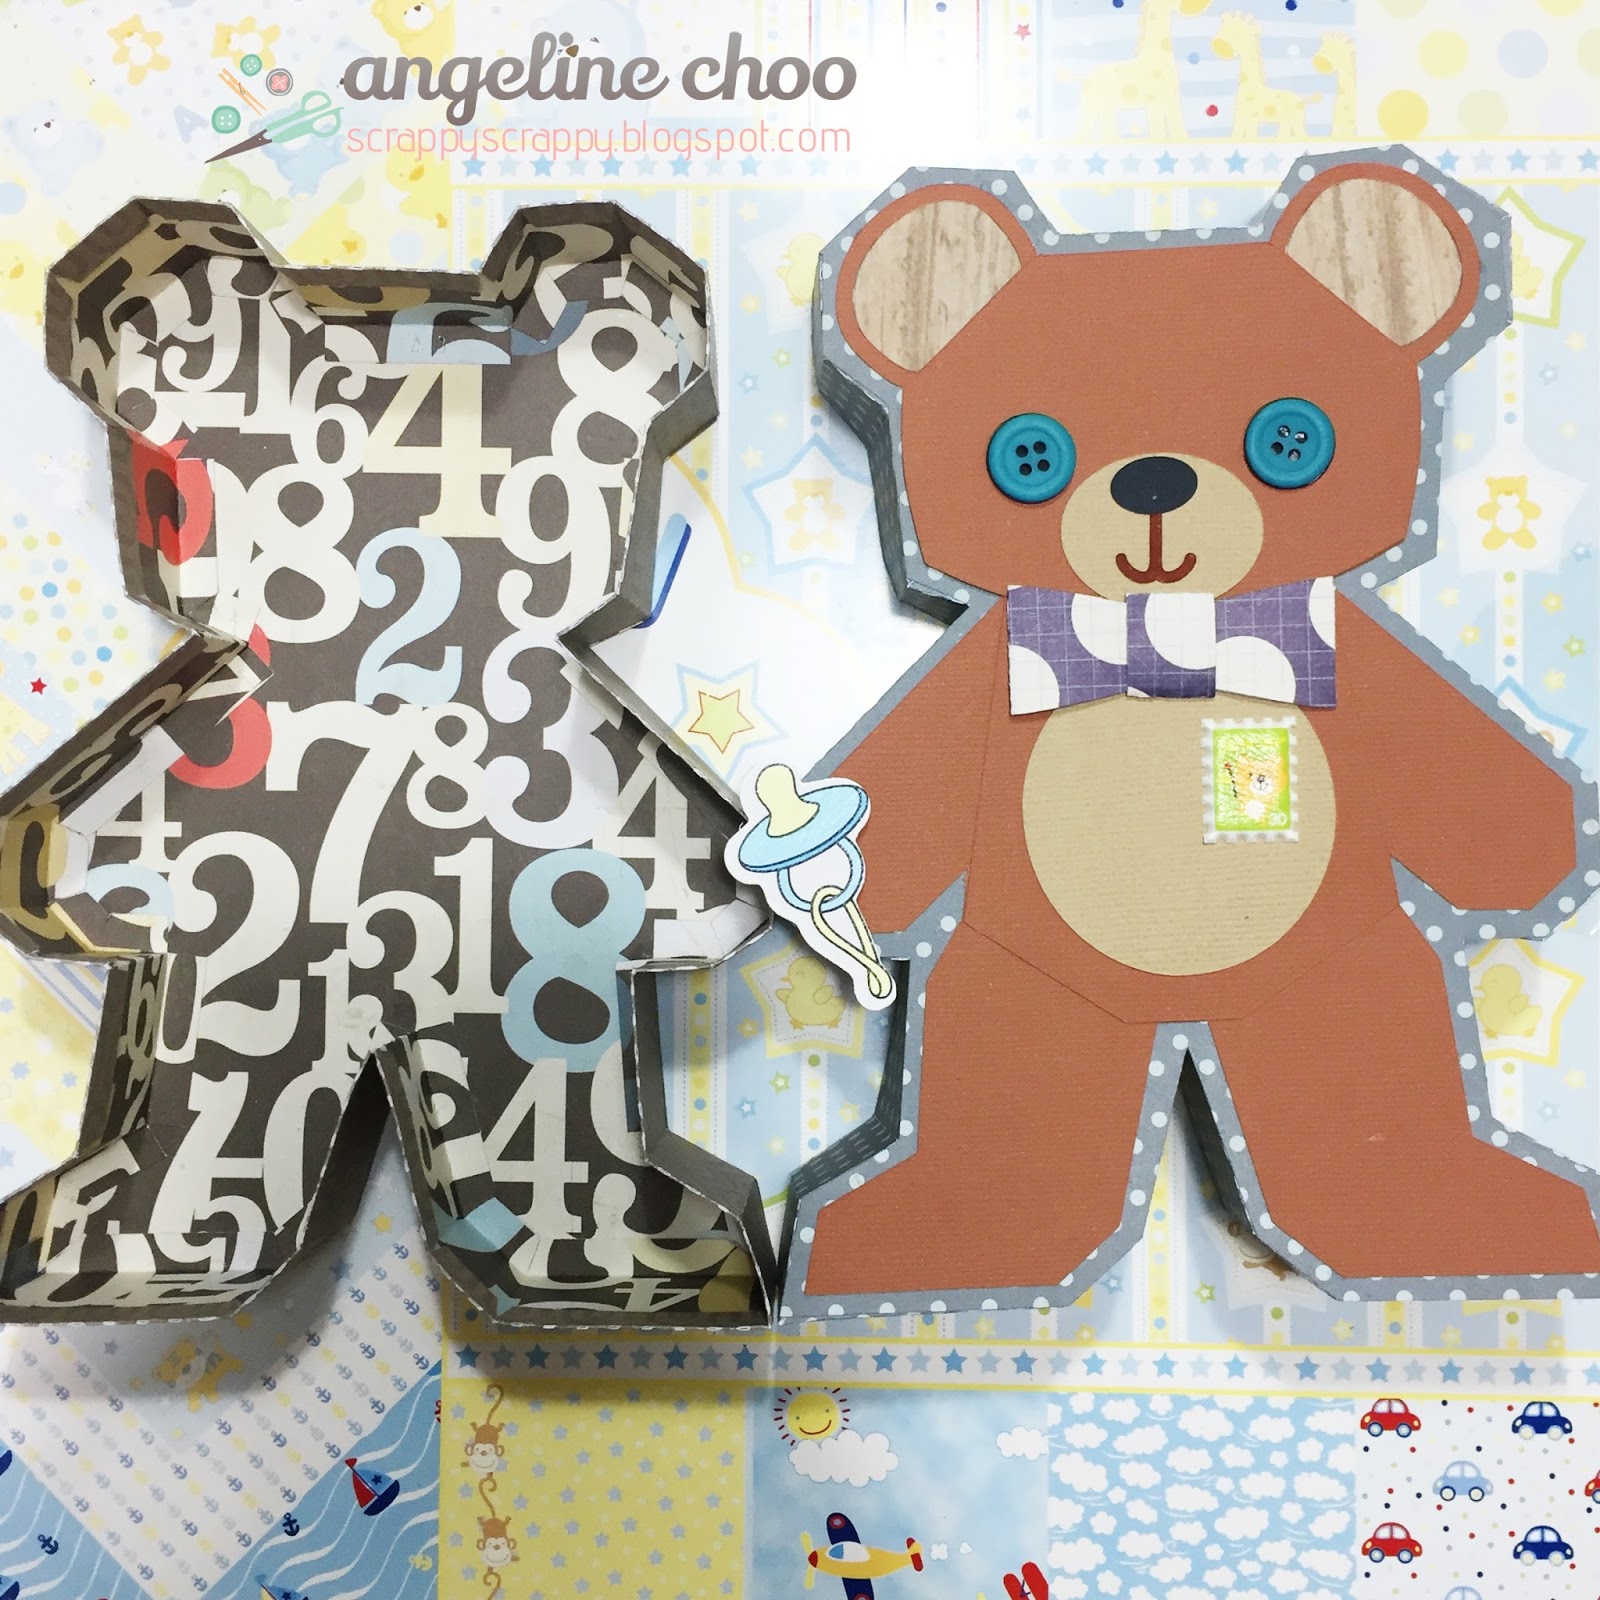 Download SVG Attic Blog: Beary Sweet Box with Angeline